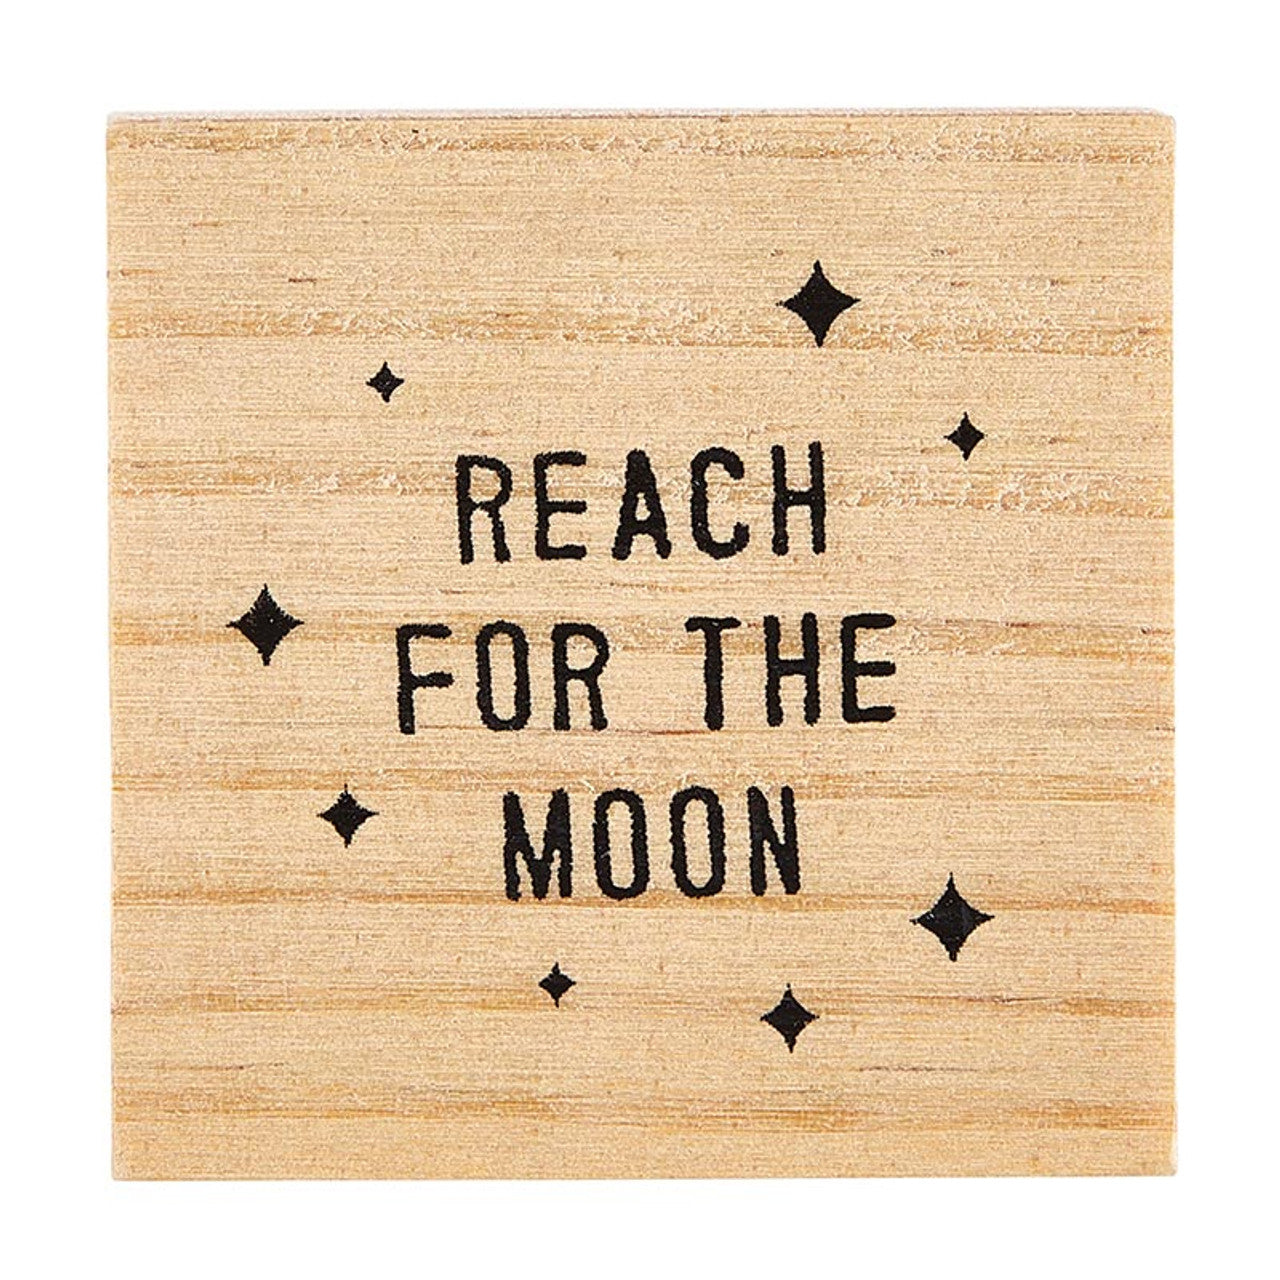 Reach for the Moon Treasure Box Earrings | Star and Moon Shaped Earrings in Wooden Gift Box